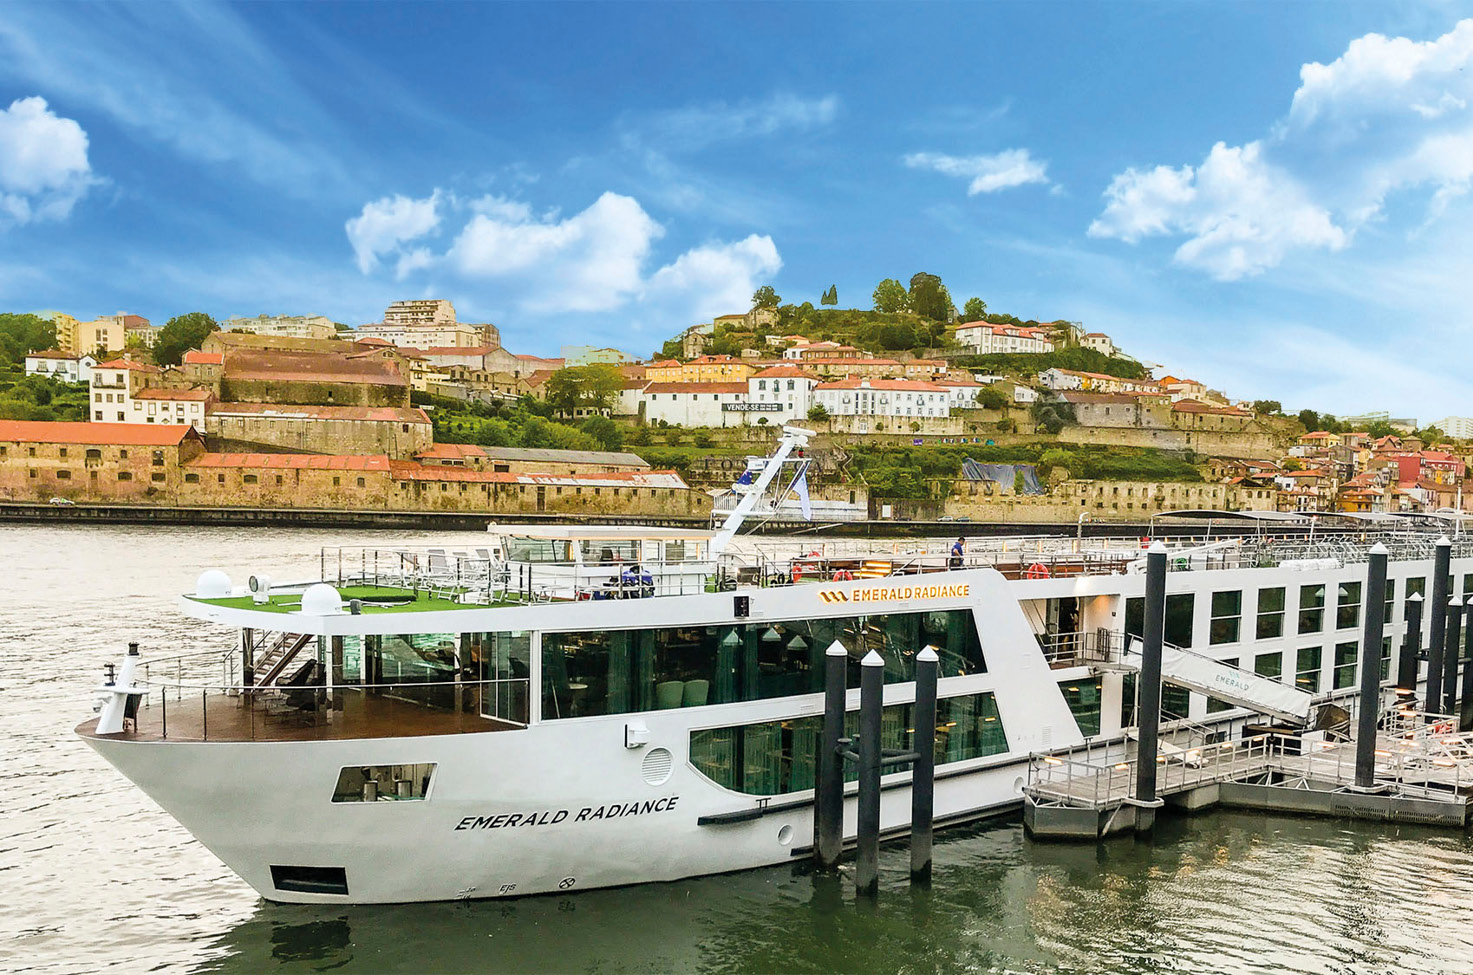 A view of the Emerald Radiance Star-Ship which is docked along the Douro River in Portugal. 